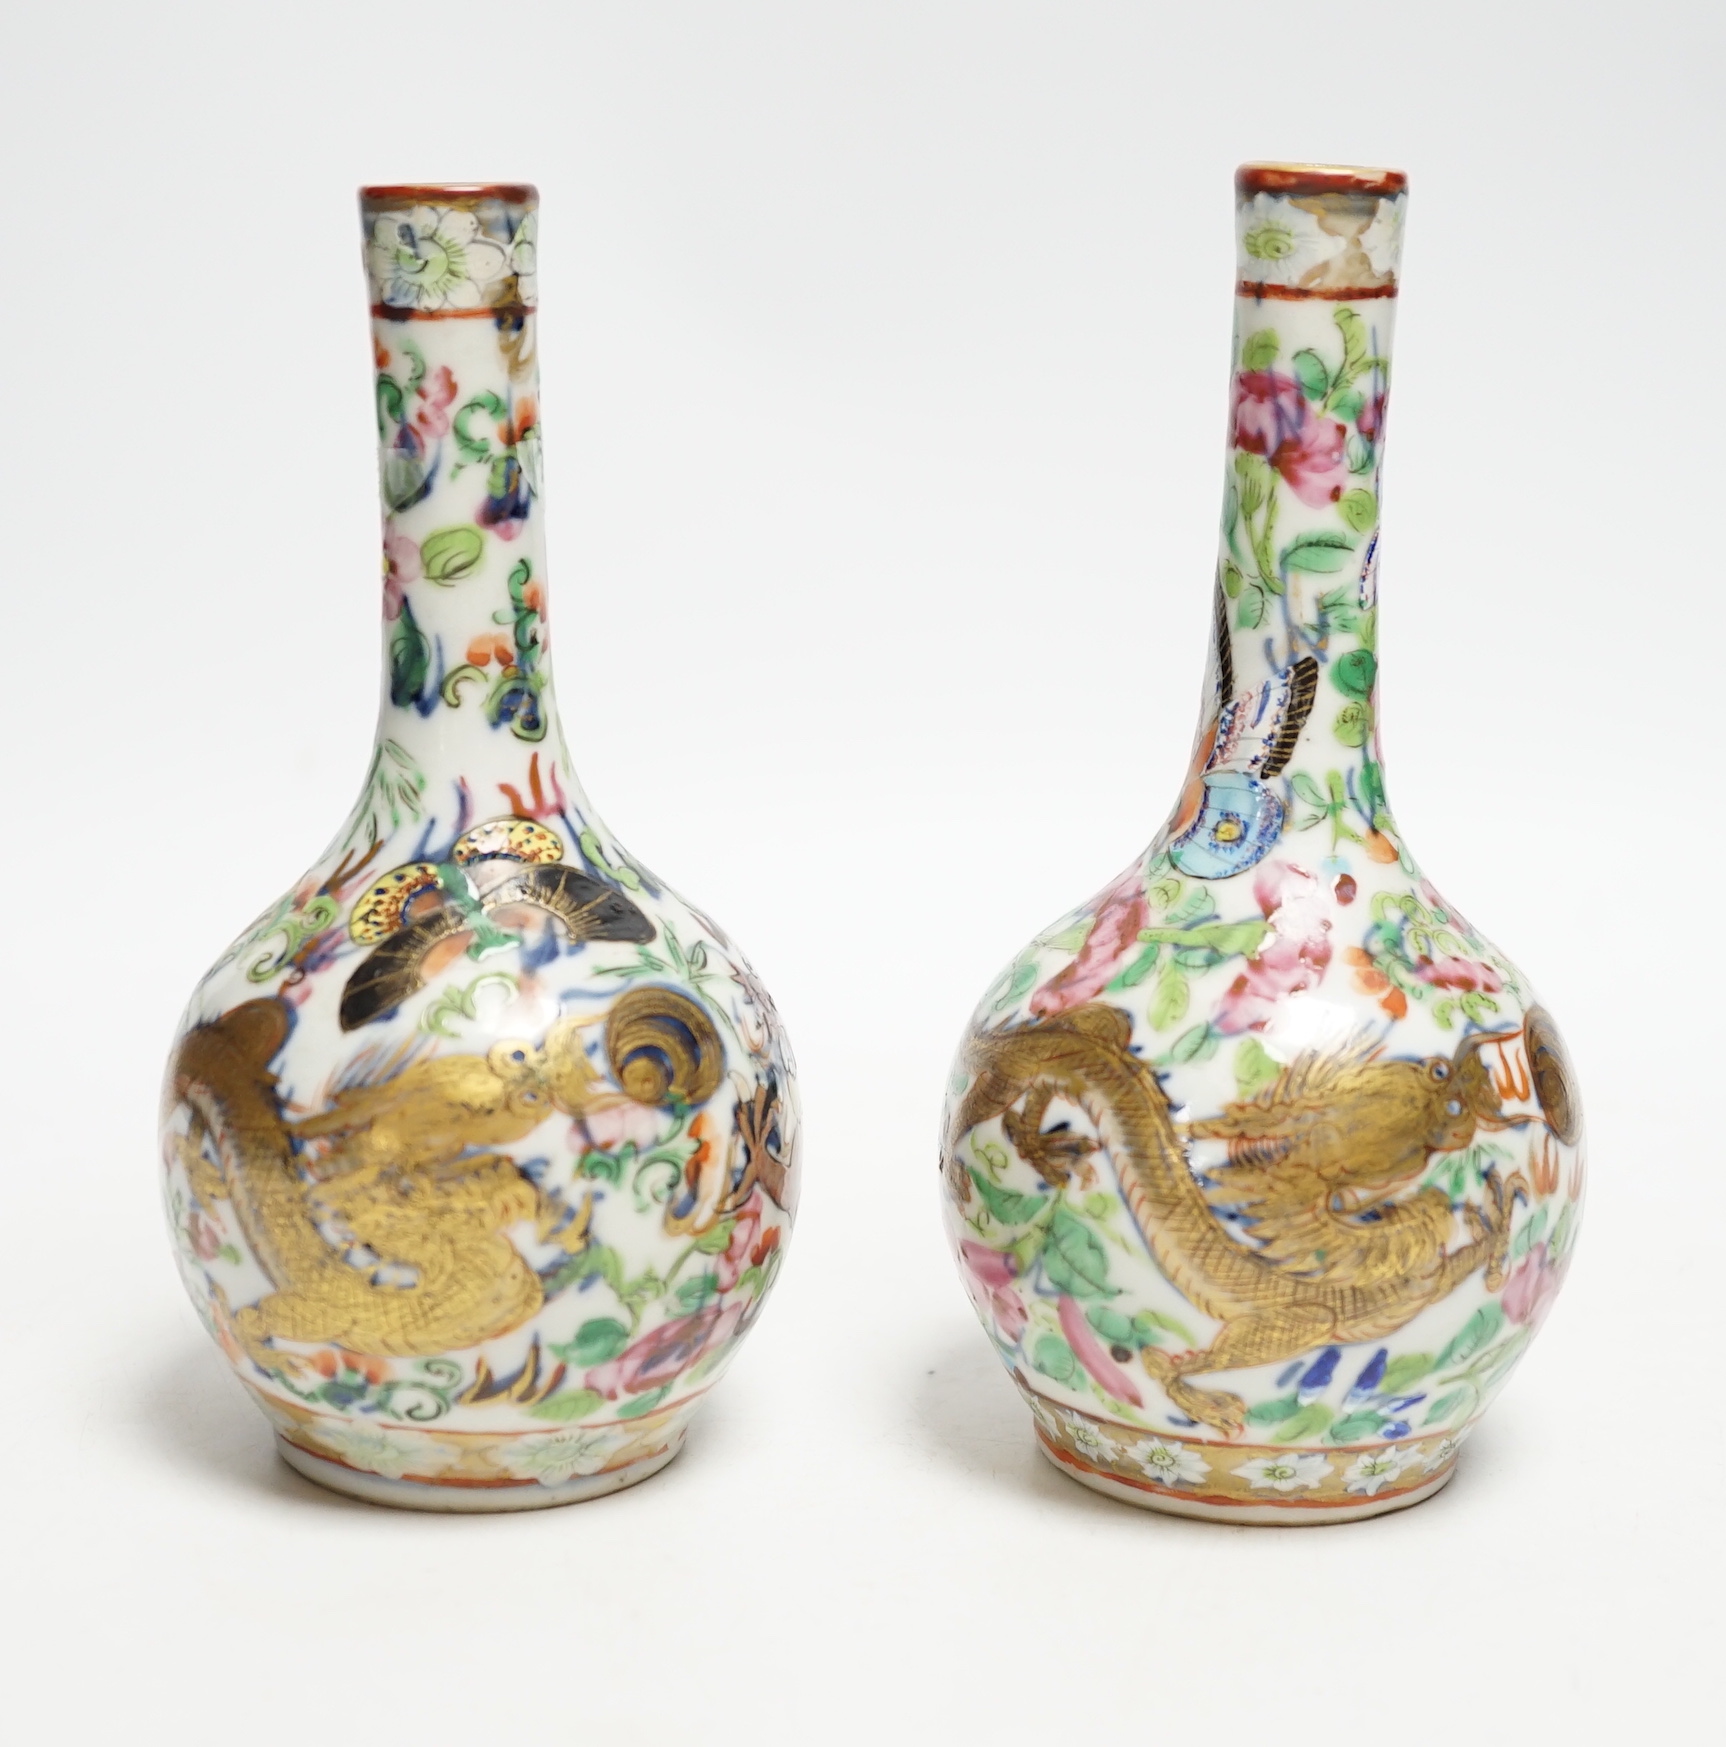 A pair of 19th century Chinese clobbered famille rose 'dragon' bottle vases, 15.5cm